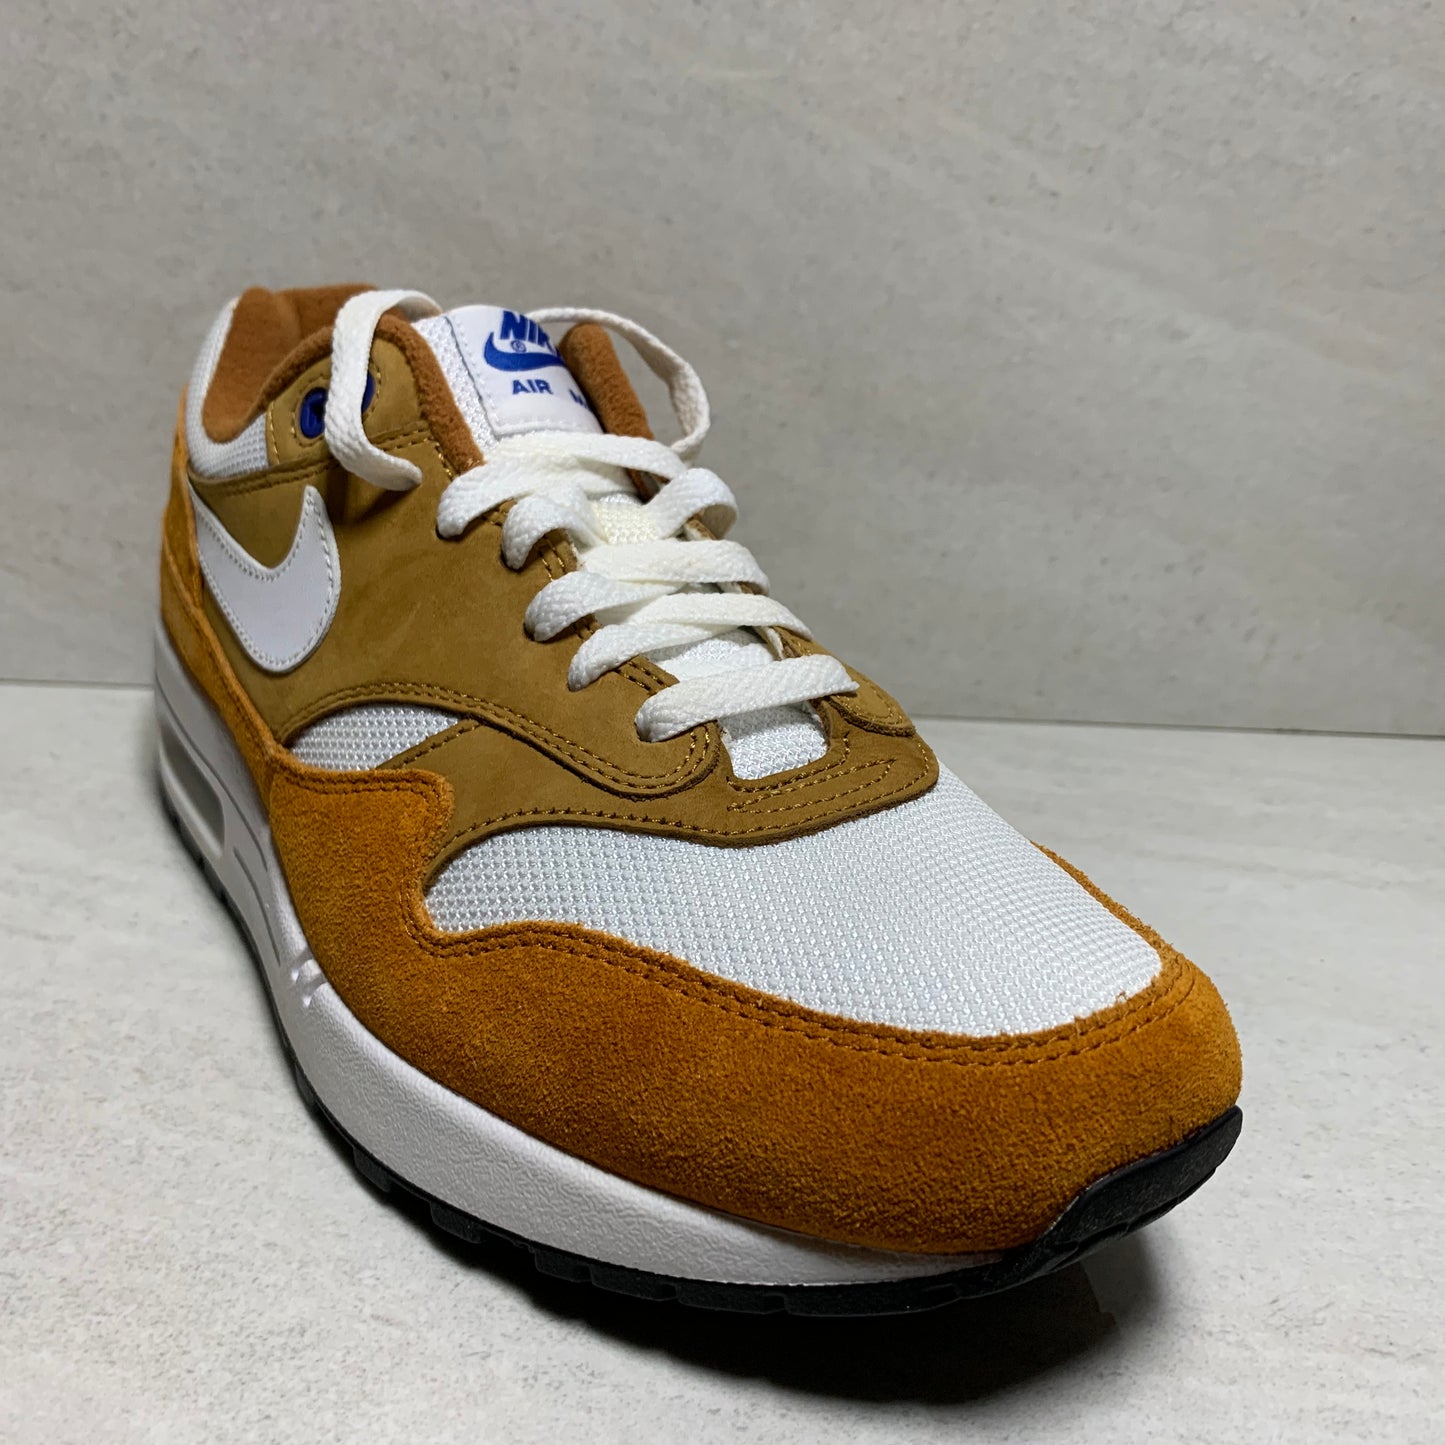 Nike Air Max 1 Curry (2018) - 908366-700 - Men's Size 7.5